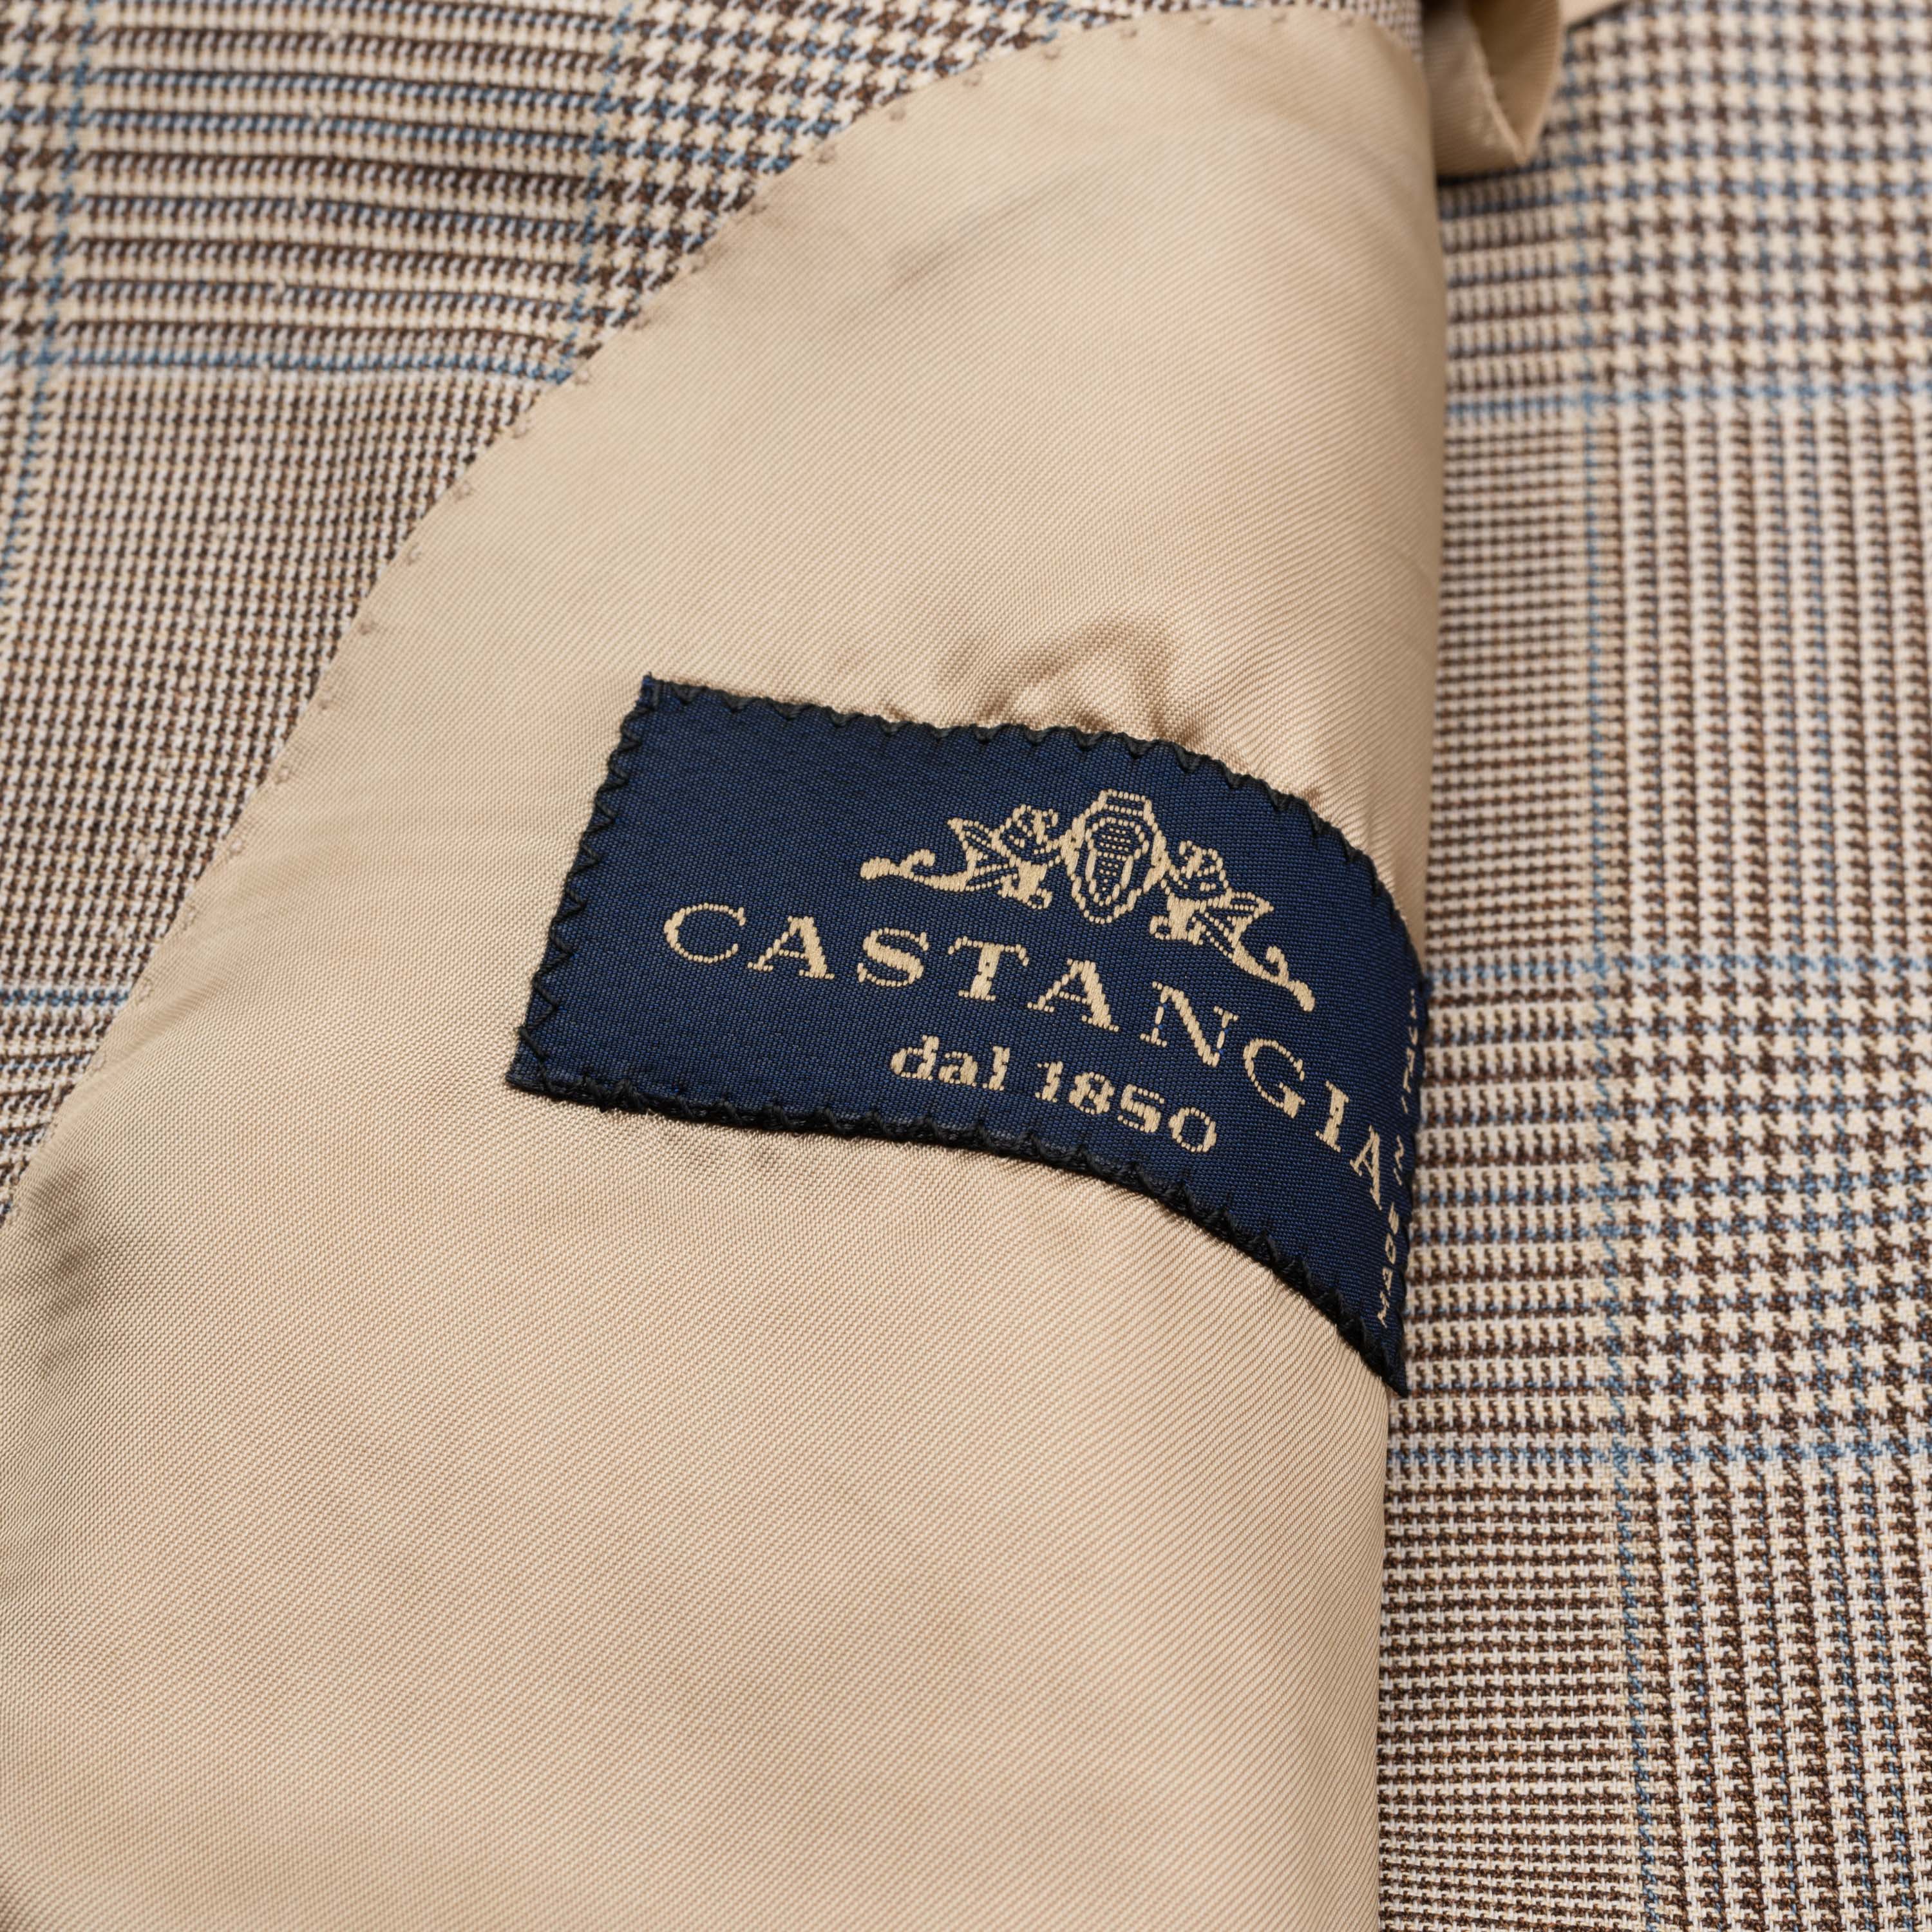 CASTANGIA 1850 Beige Prince of Wales Wool Super 100's Sport Coat Jacket NEW